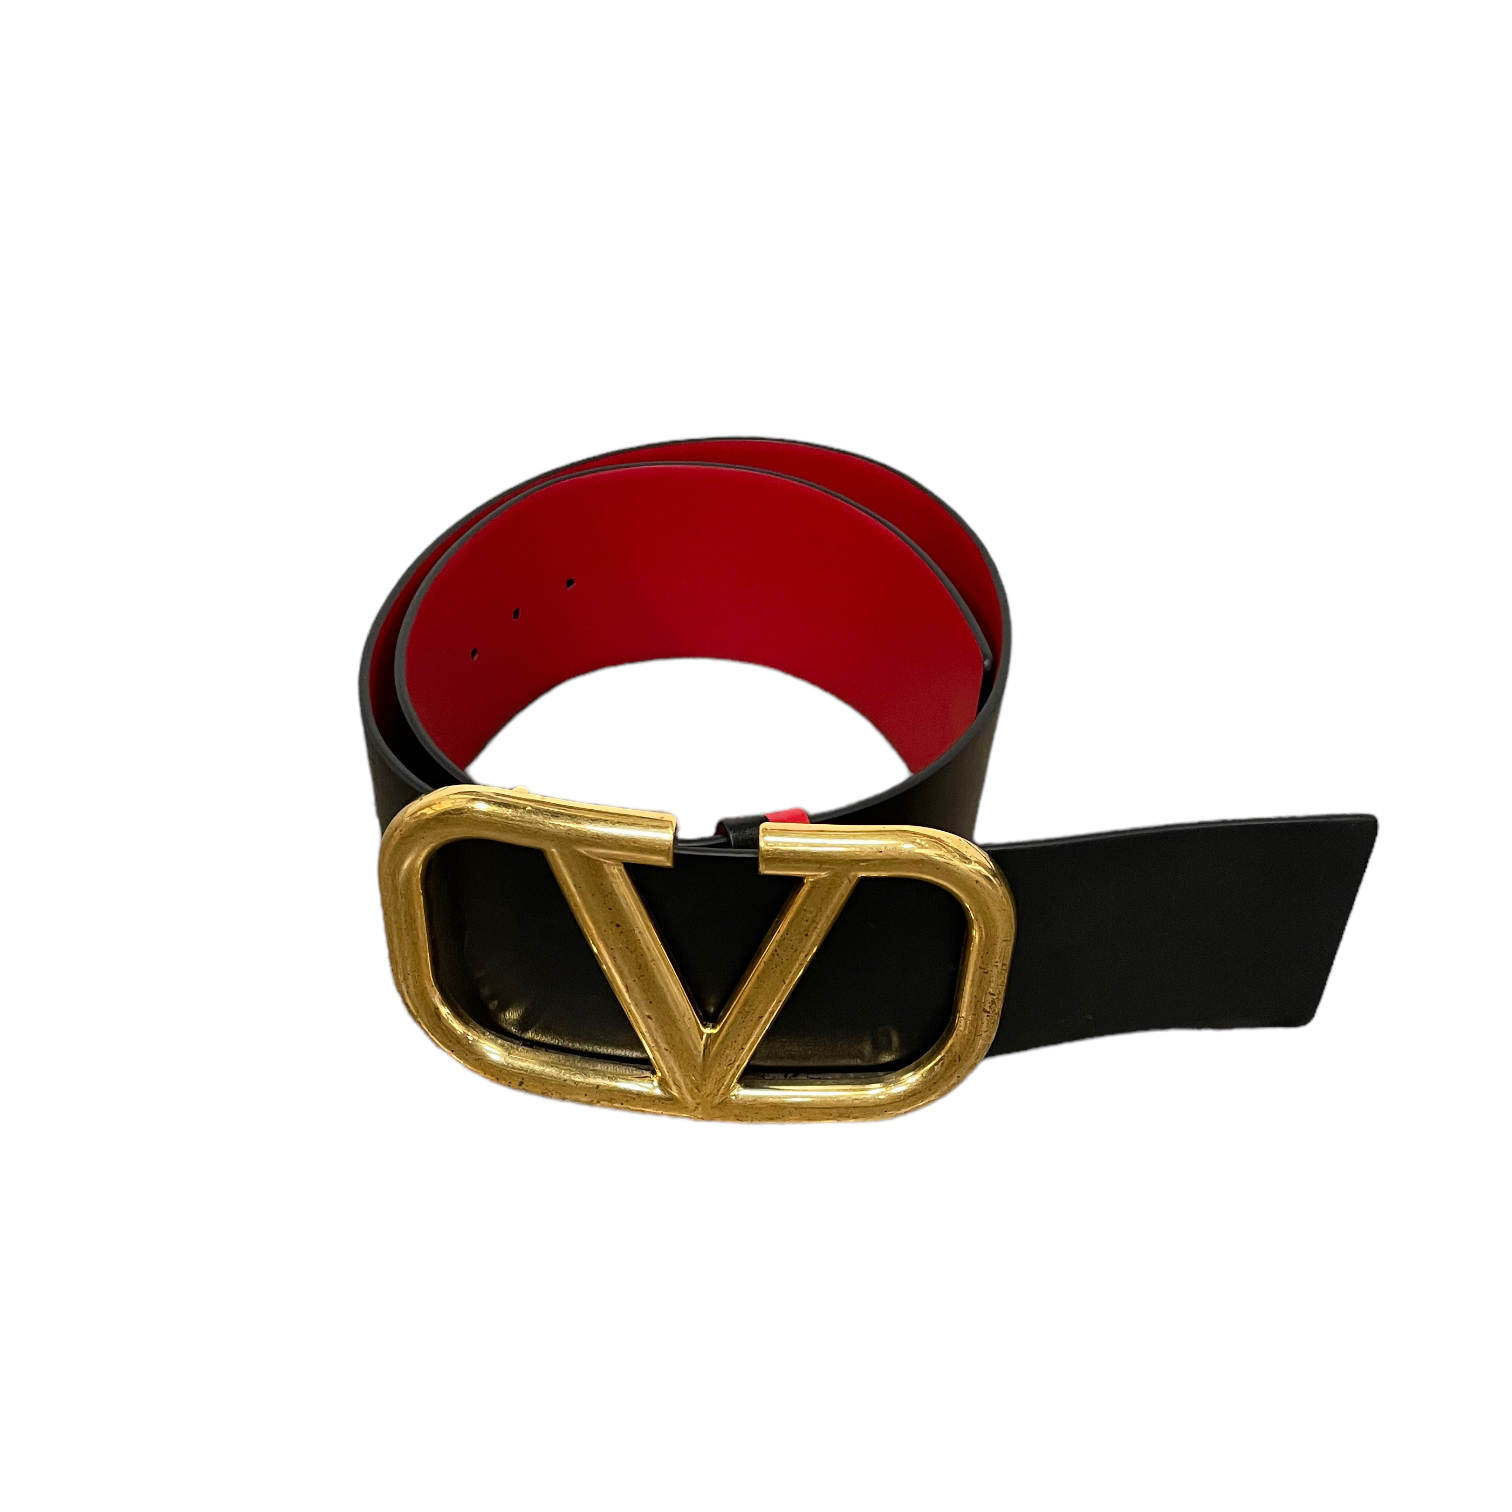 Valentino Large Belt, Blk/Red, Size: Size 85
An extra puncture on the side of the belt, see photos for details